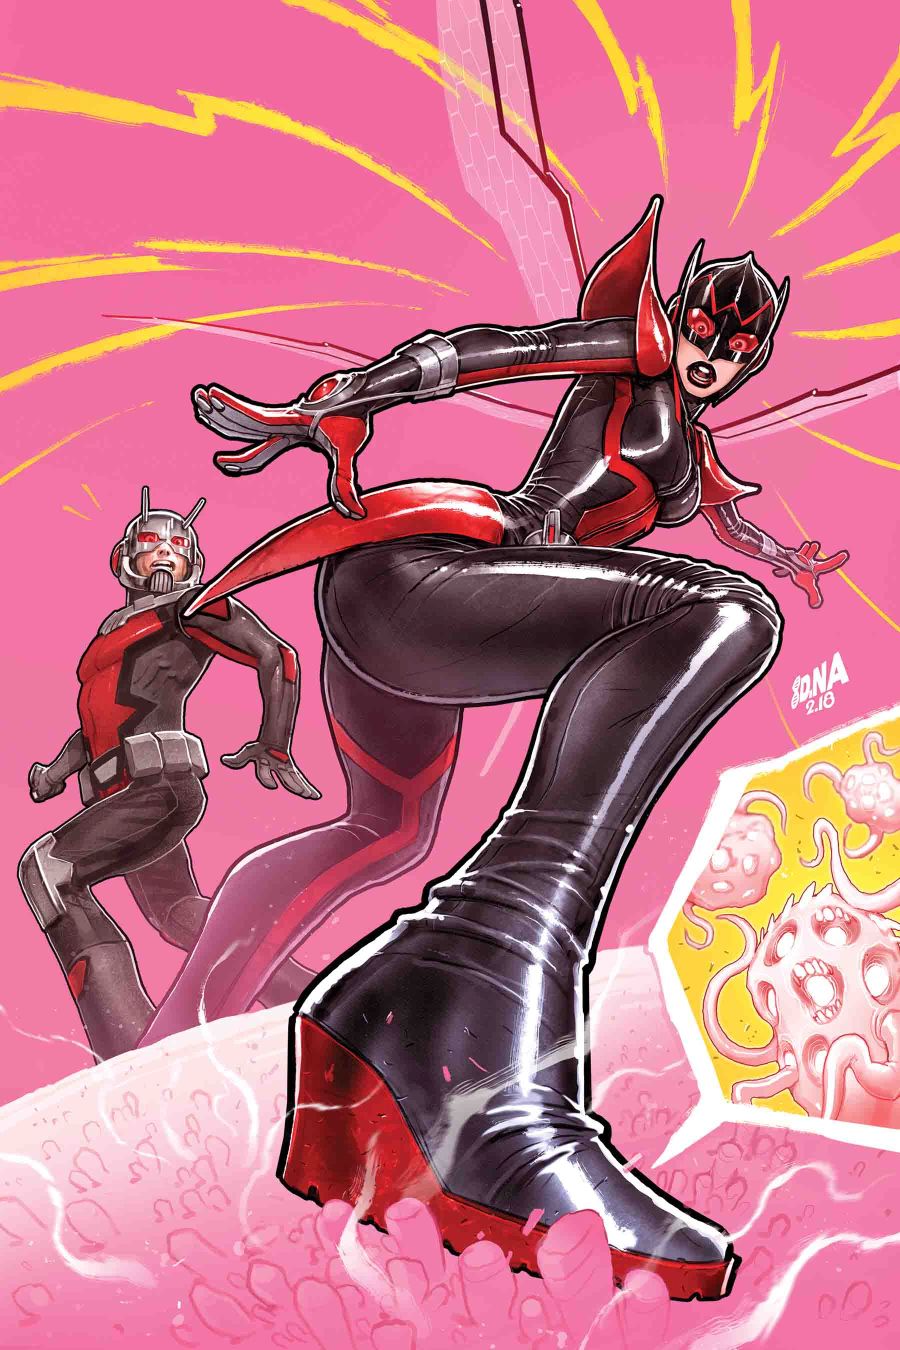 ANT-MAN & THE WASP #3 (OF 5)